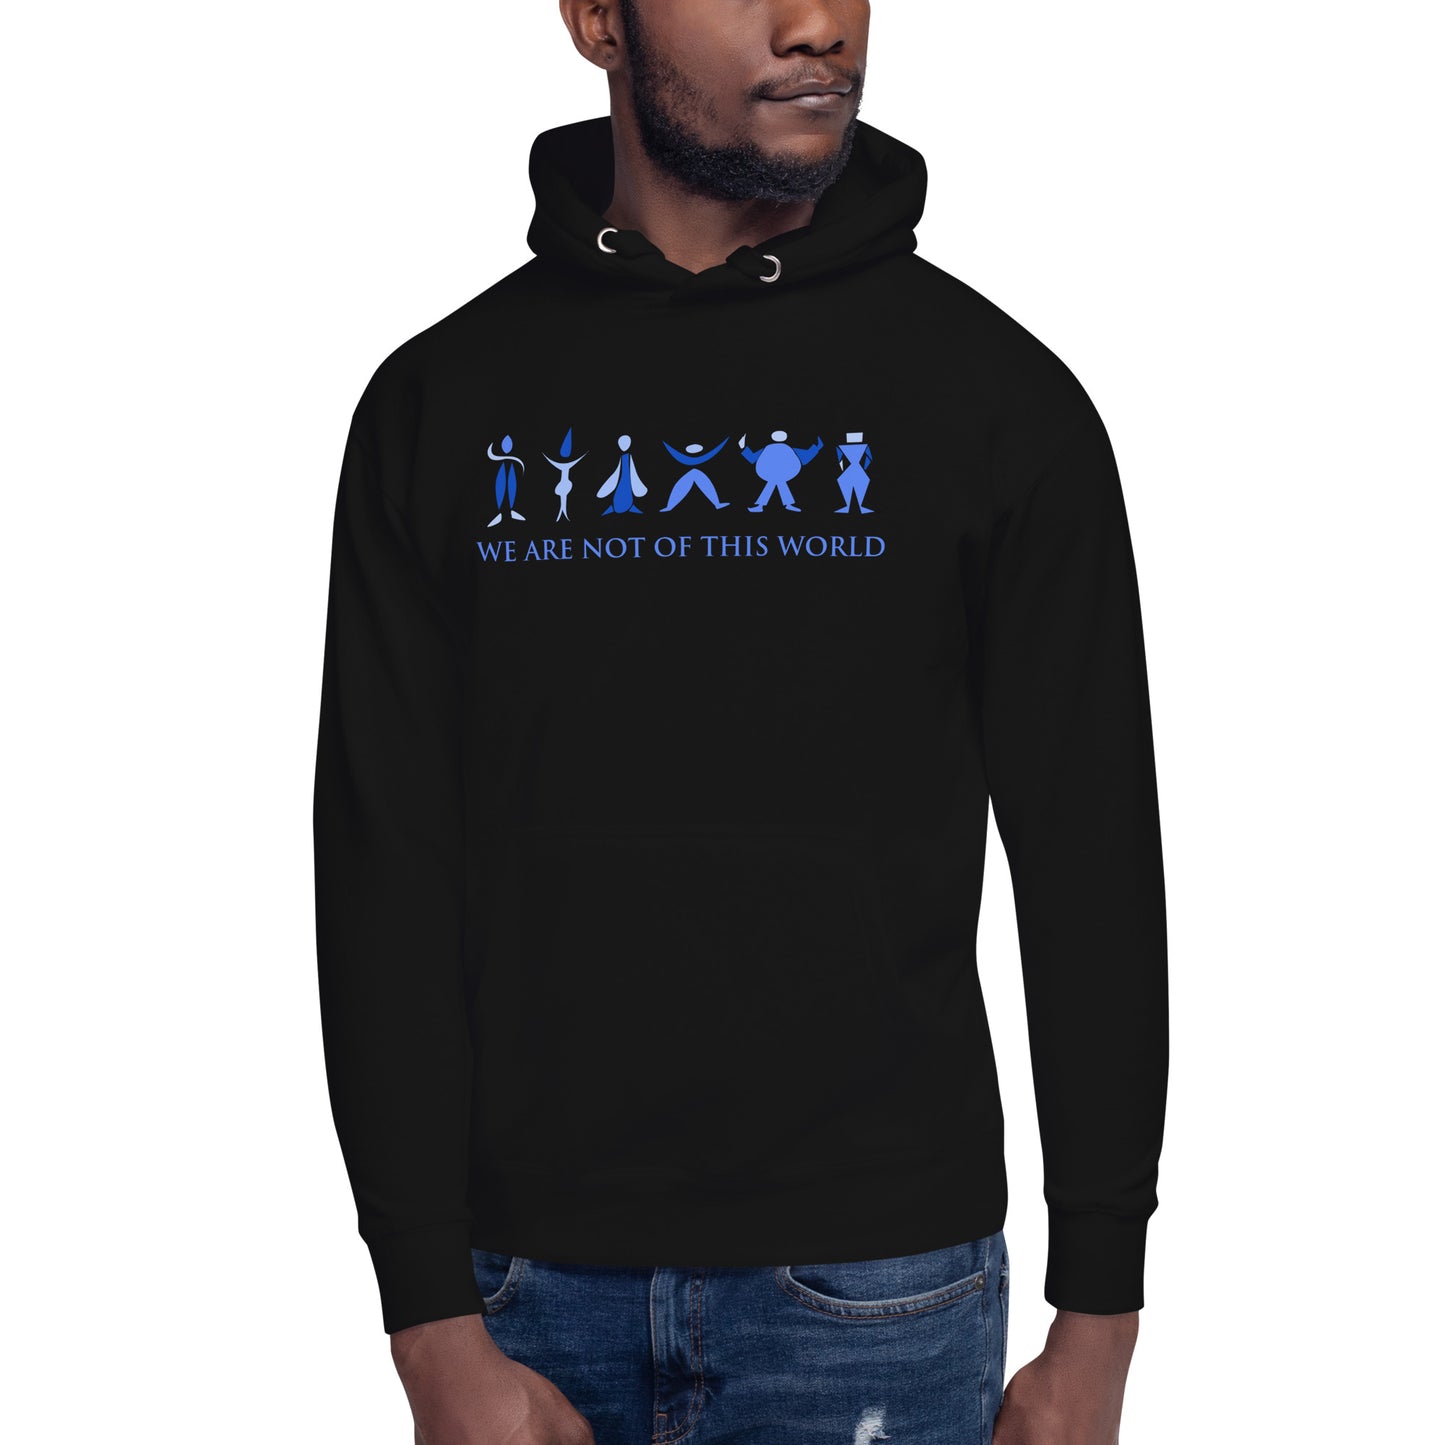 We Are Not of This World Men's Hoodie